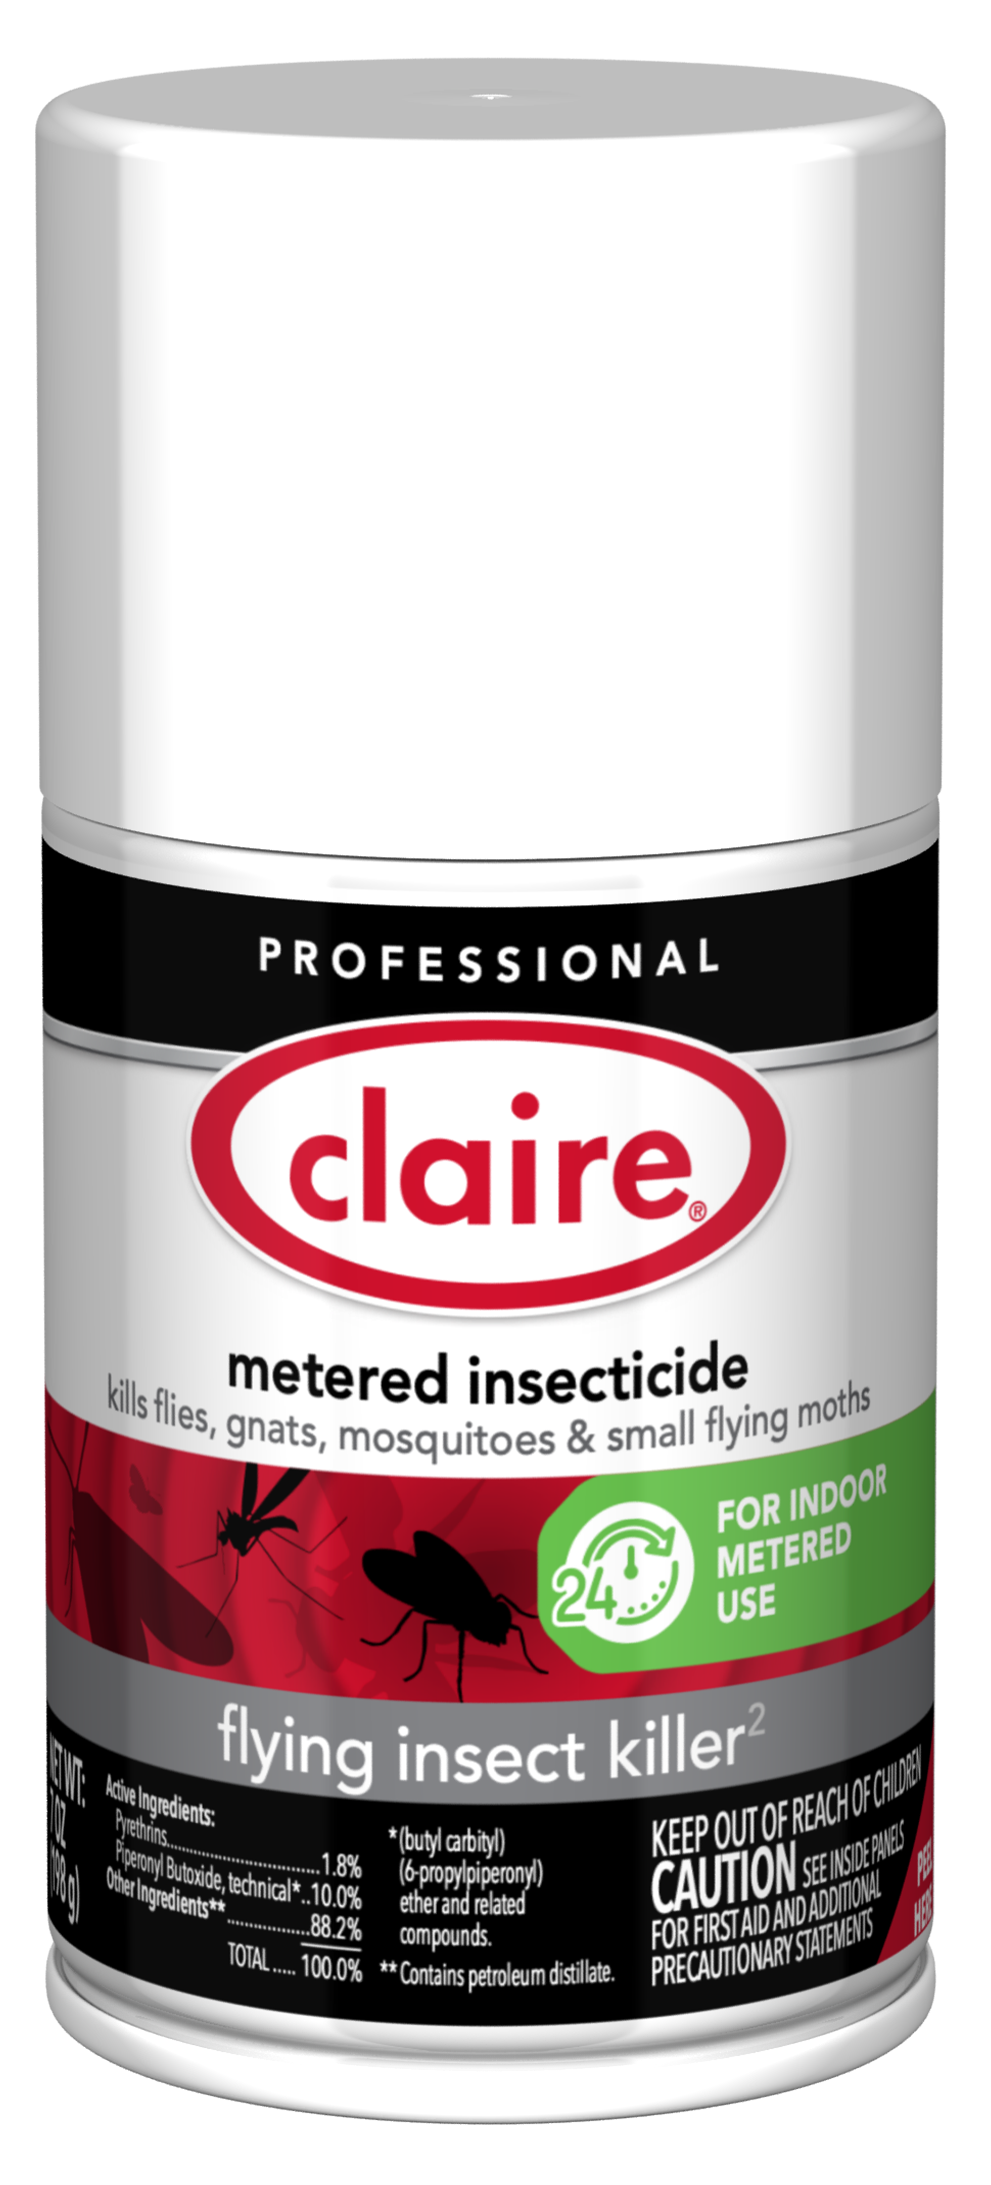 Claire CL993 9.5 x 12 Stainless Steel Wipes - 40 Wipes per Tub